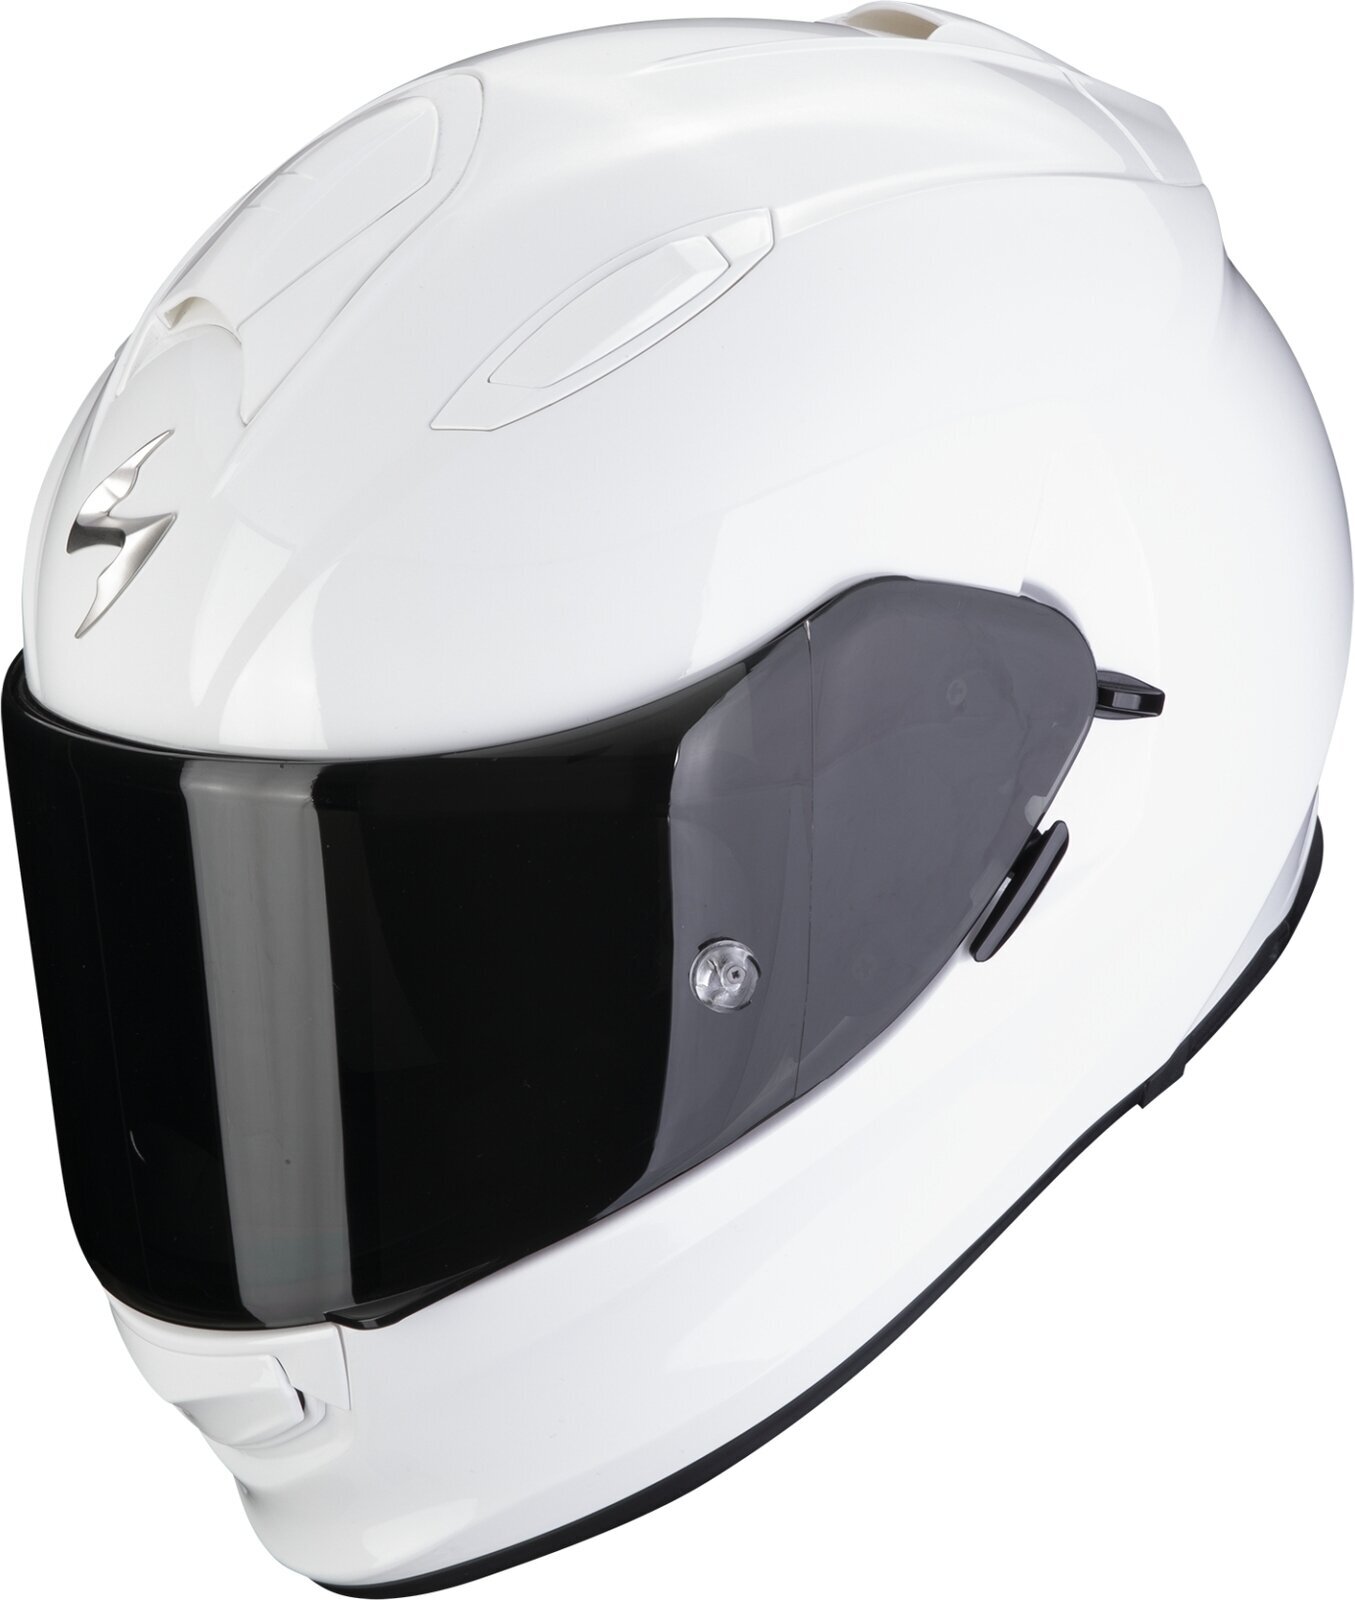 Kask Scorpion EXO 491 SOLID White S Kask